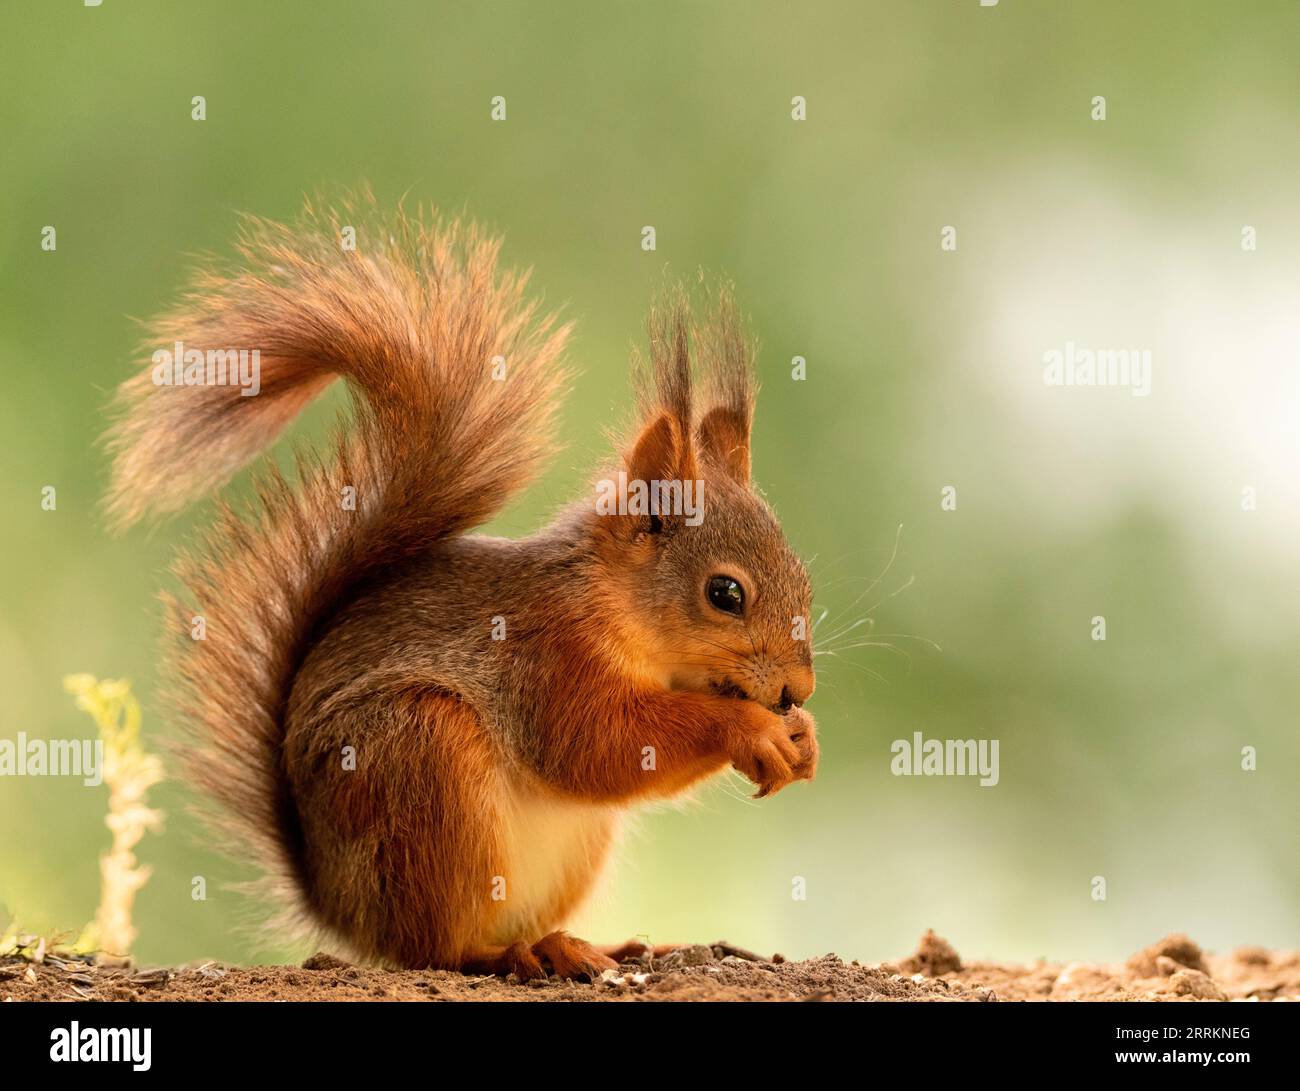 Red Squirrel standing on the ground Stock Photo